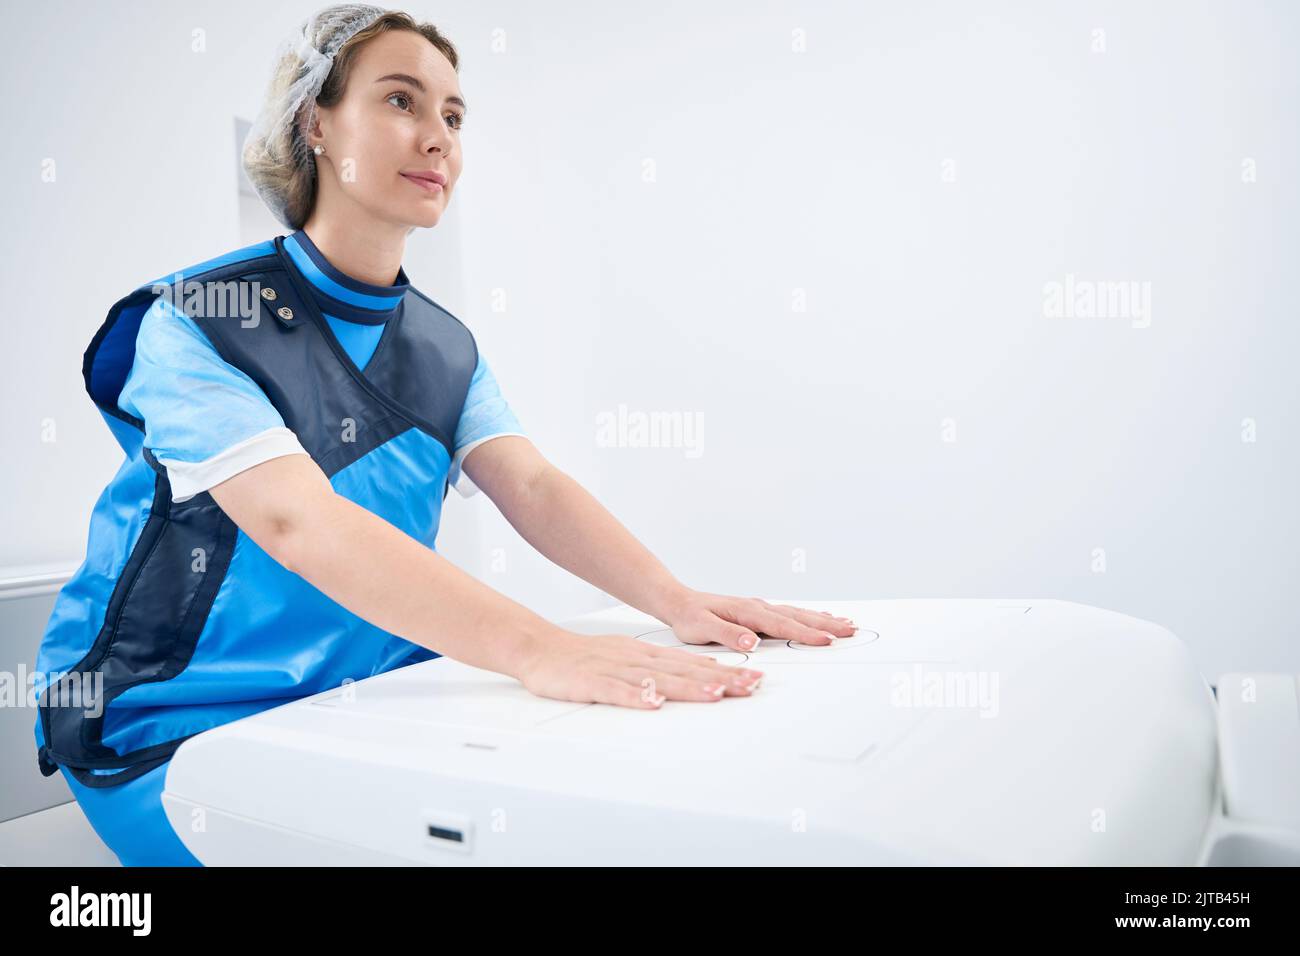 Woman in lead shield keeps her hands on the machine Stock Photo